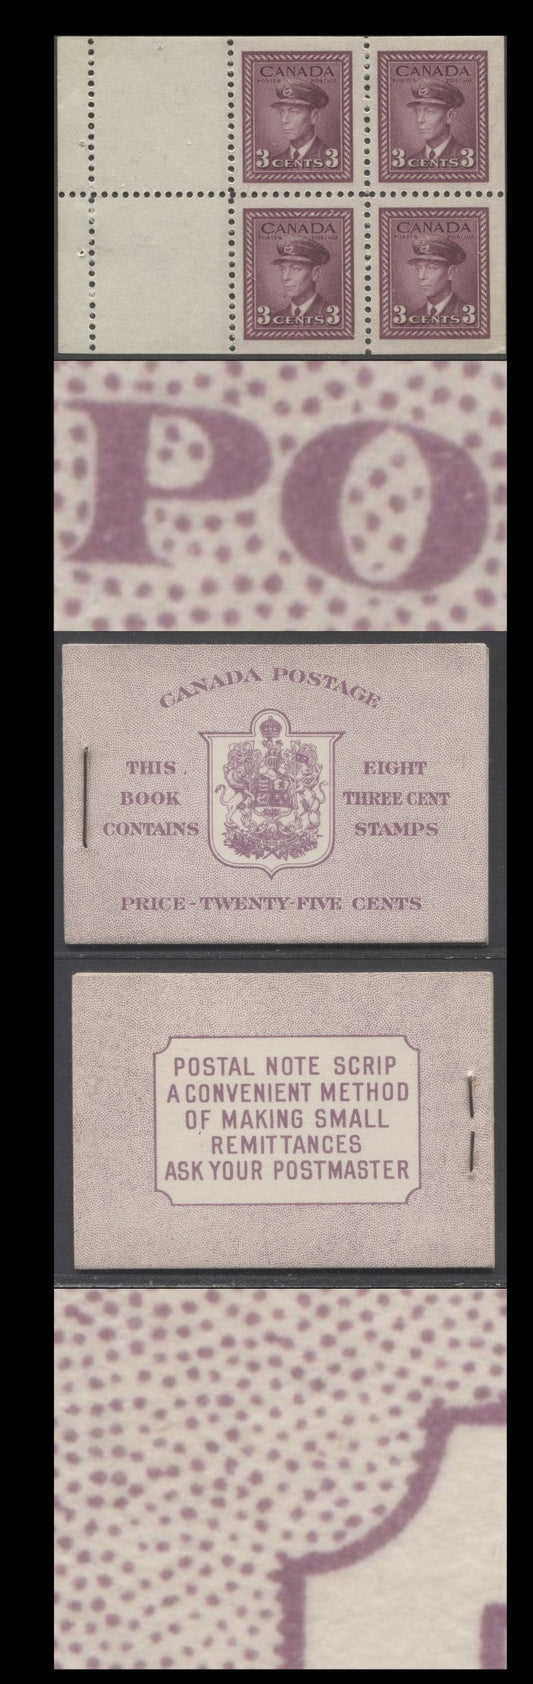 Lot 92 Canada #BK35dE 1942-1947 War Issue, A Complete 25c English Booklet, 2 Panes Of 4+2 Labels 3c Rose Violet, Front Cover IIf, Back Cover Caiii, Type II, 7c & 5c Rates Page, 1,201,000 Issued